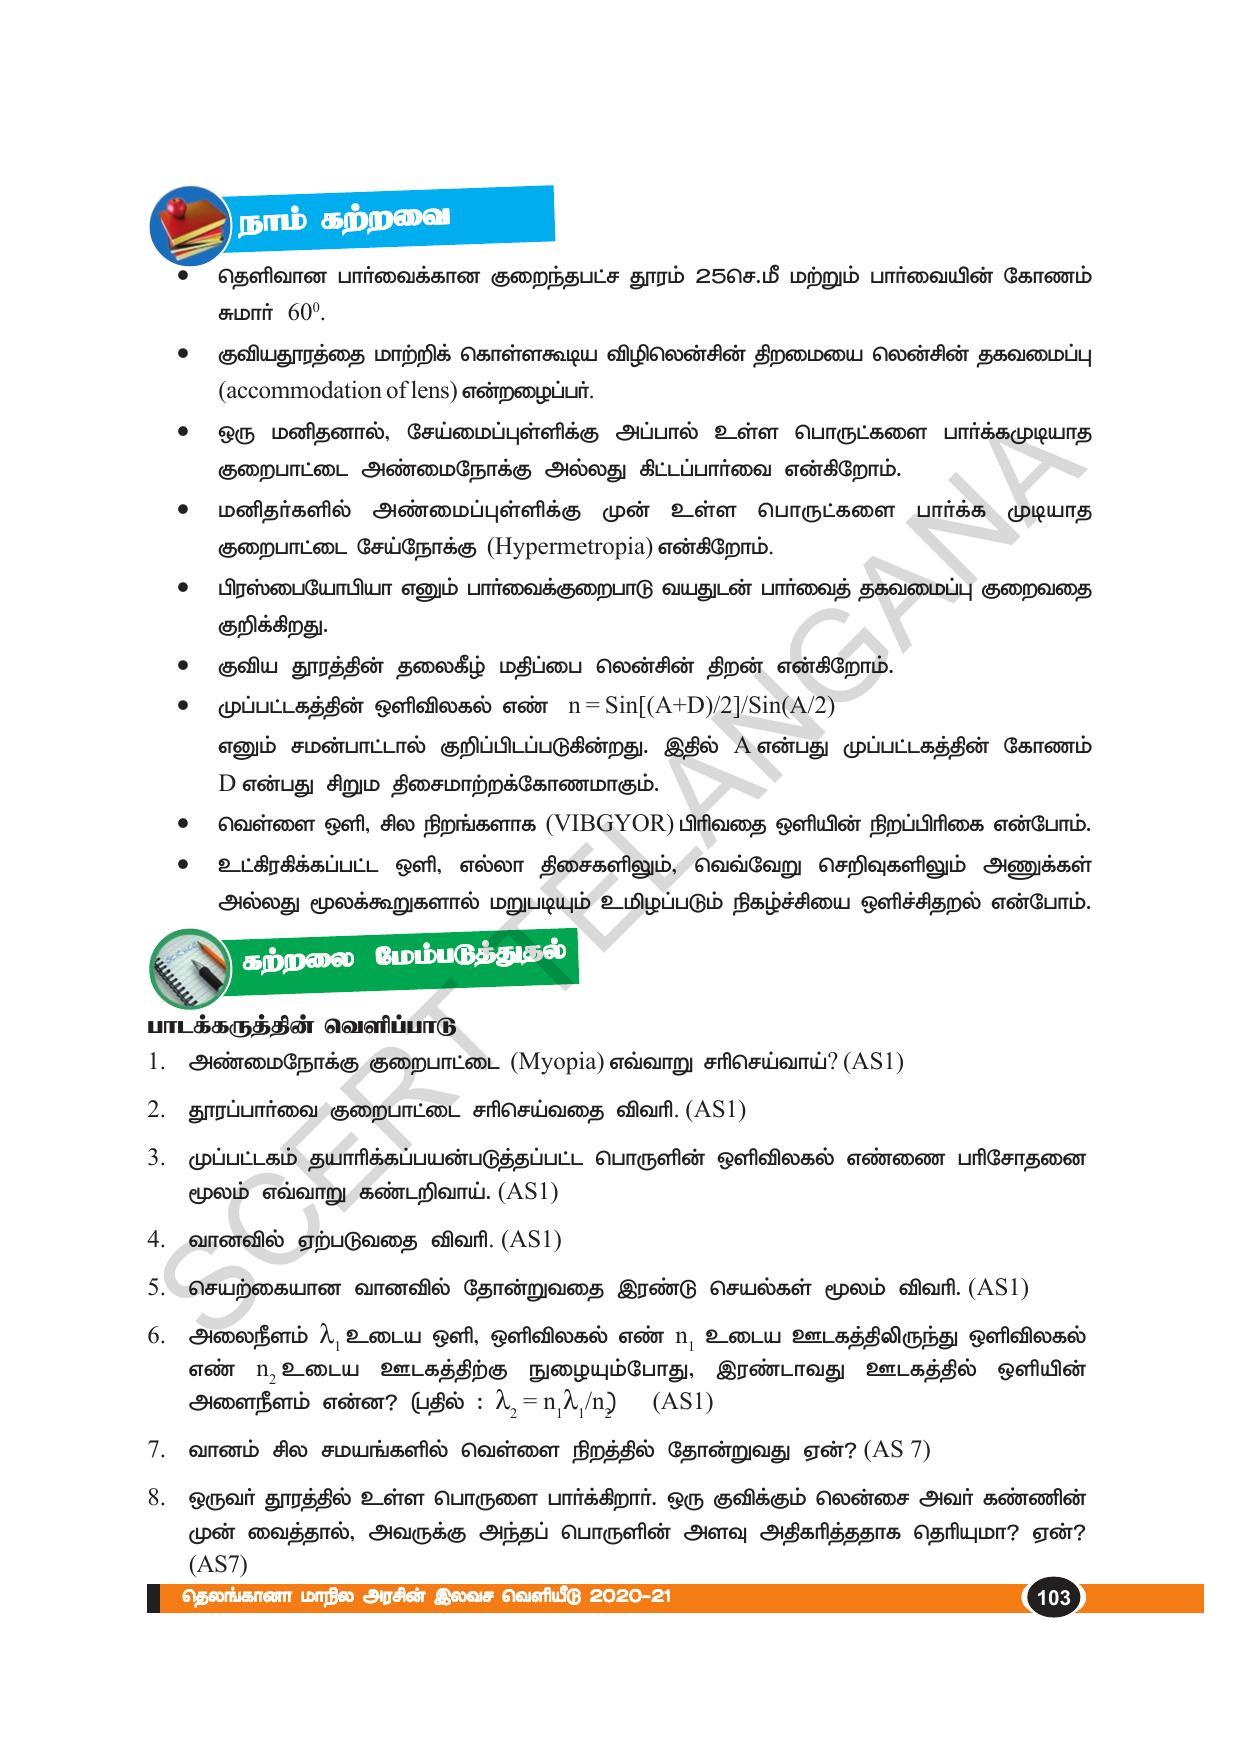 TS SCERT Class 10 Physical Science(Tamil Medium) Text Book - Page 115